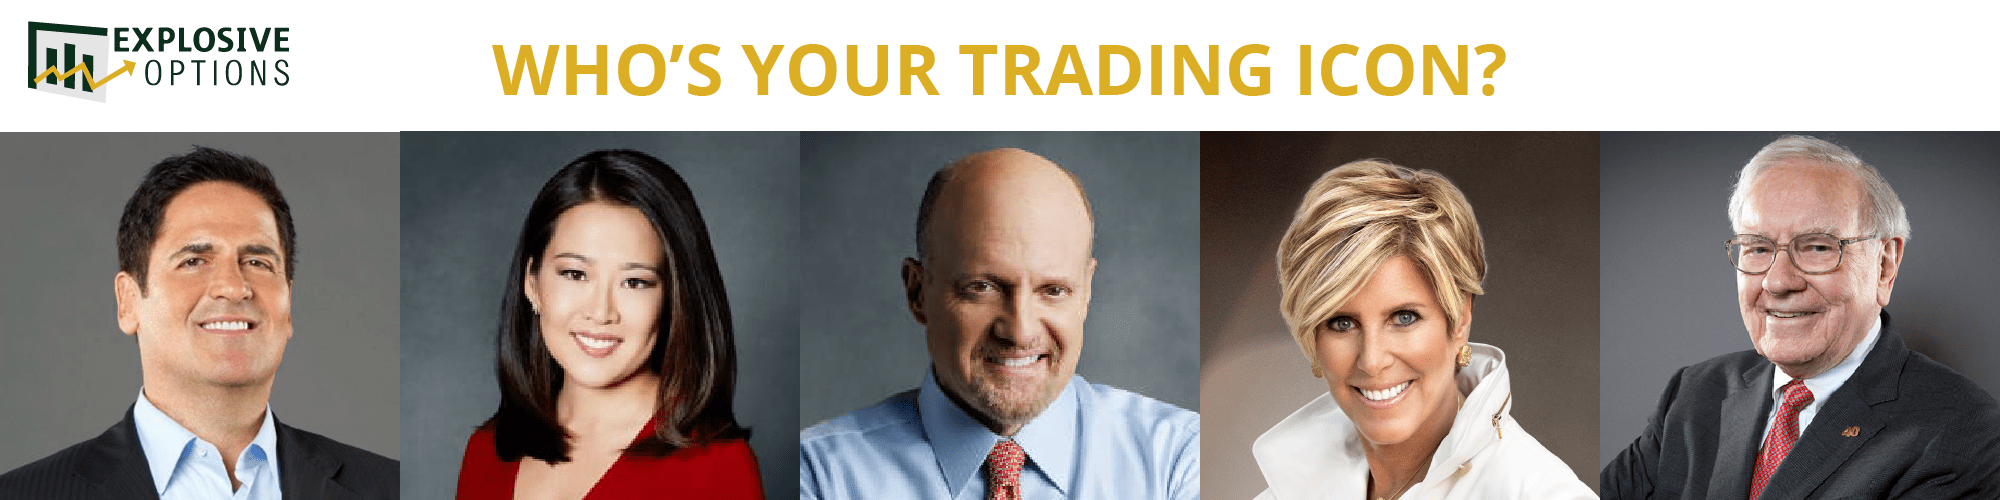 Who's your trading twin?